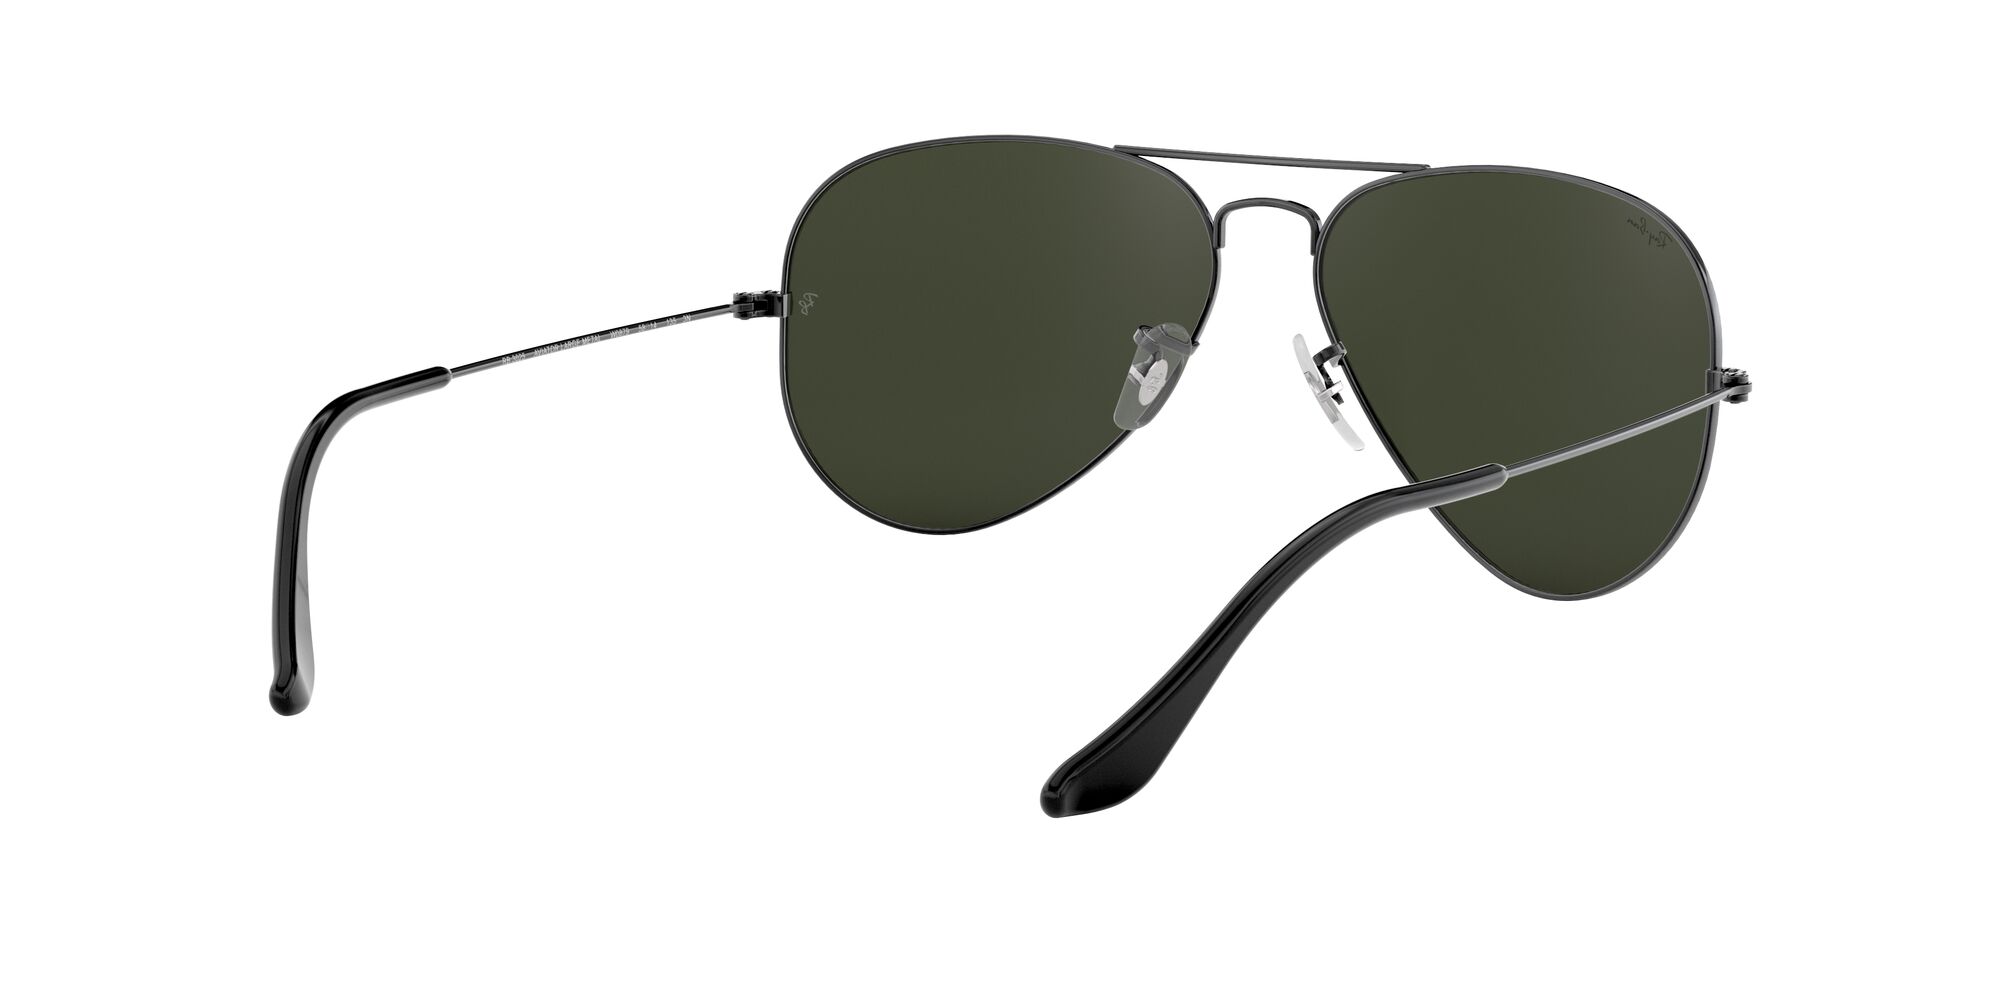 Ray-Ban RB3025 Classic Adult Sunglasses - image 2 of 12